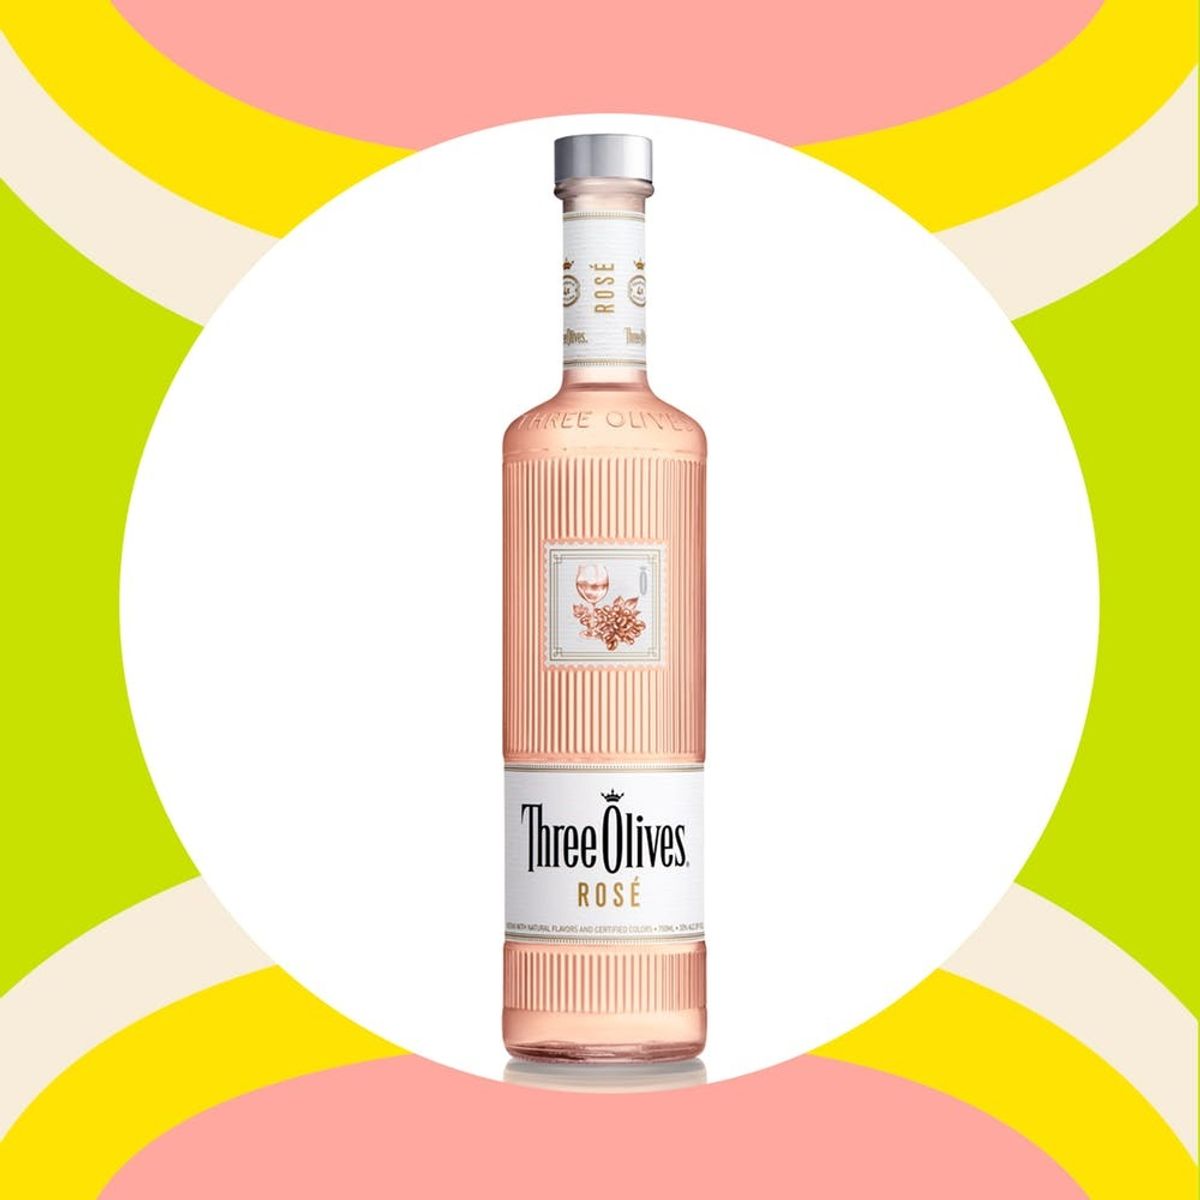 Rosé Vodka Exists Now and It’s Anything but Basic